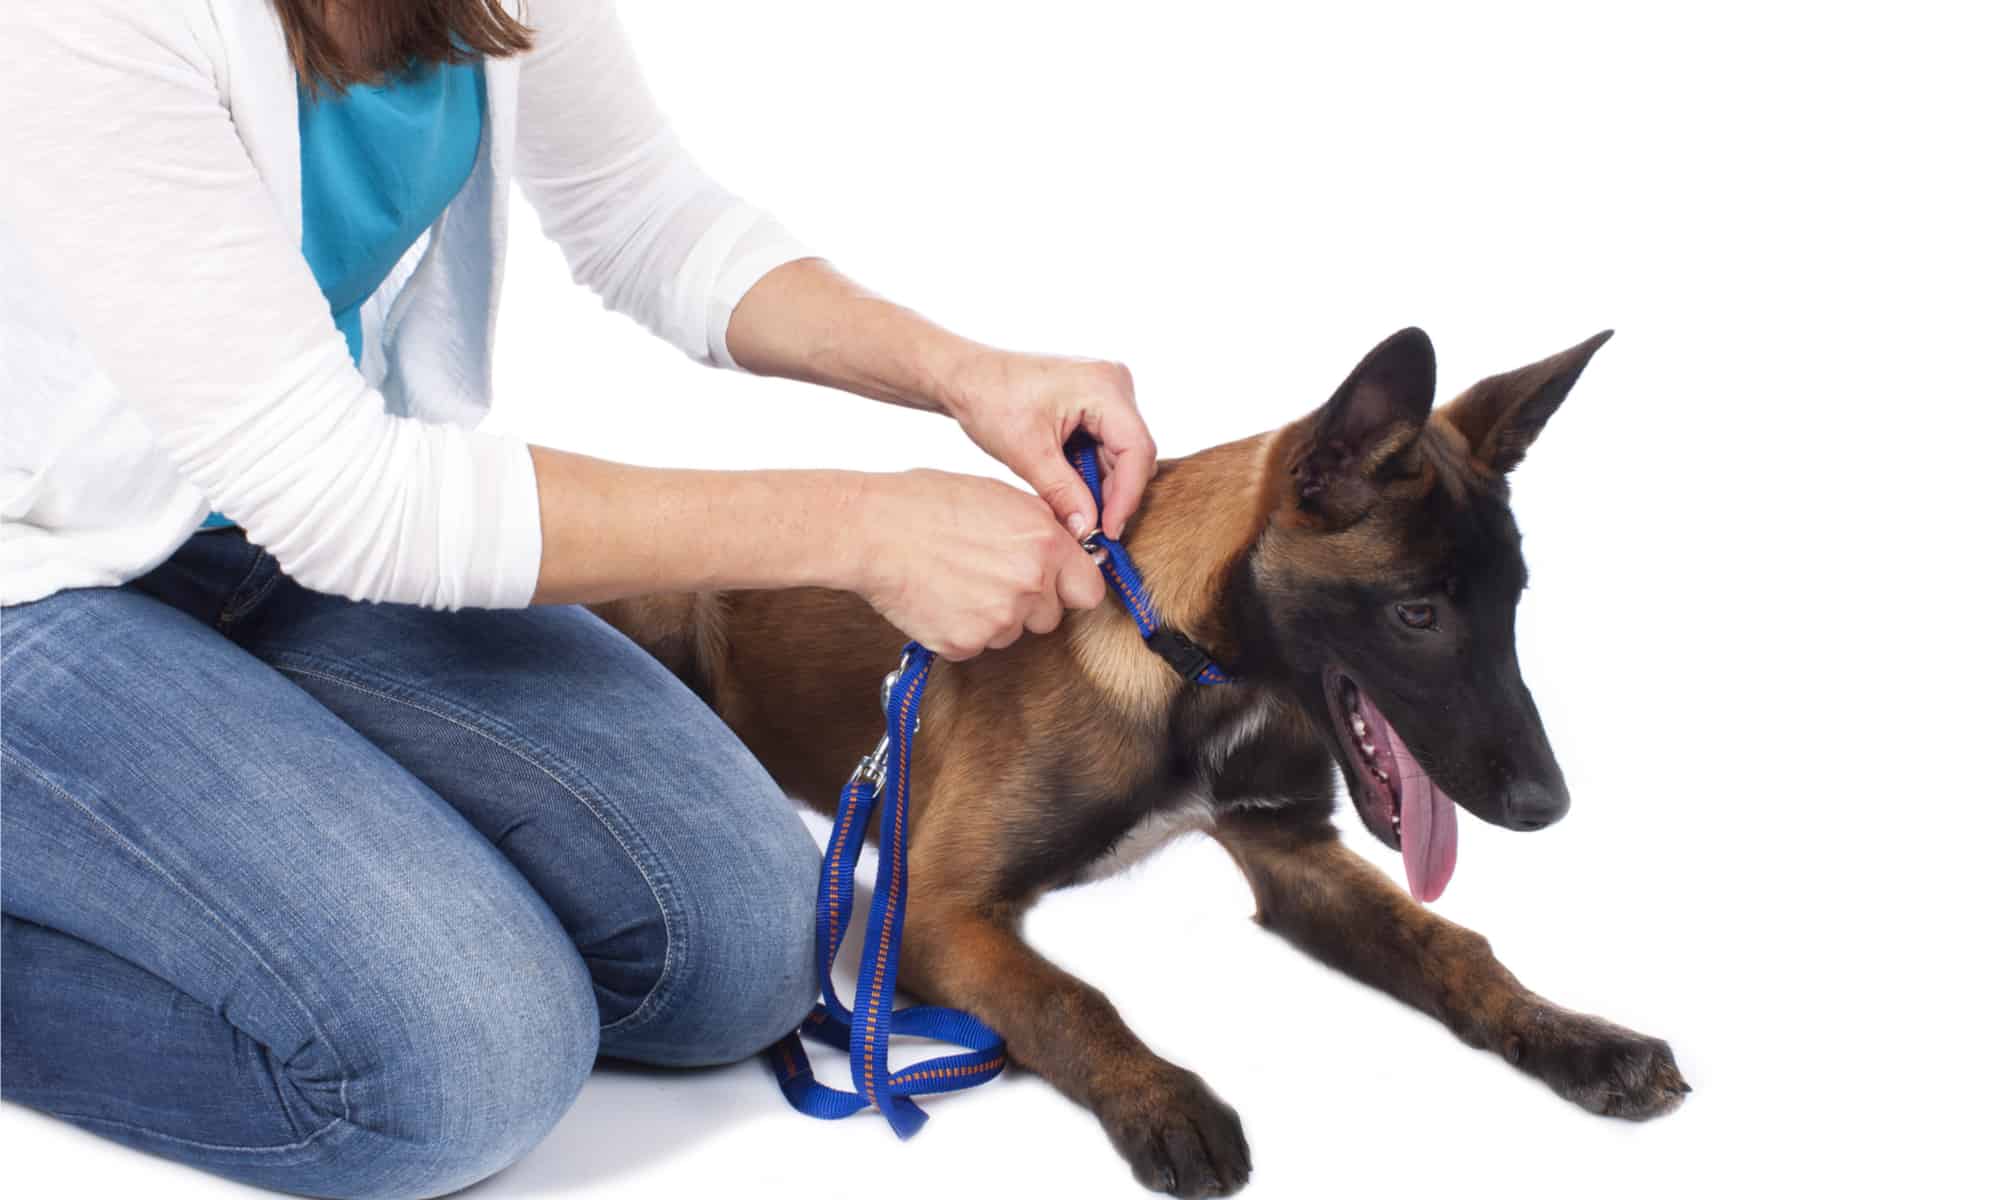 Woman attaching a leash to dog's collar